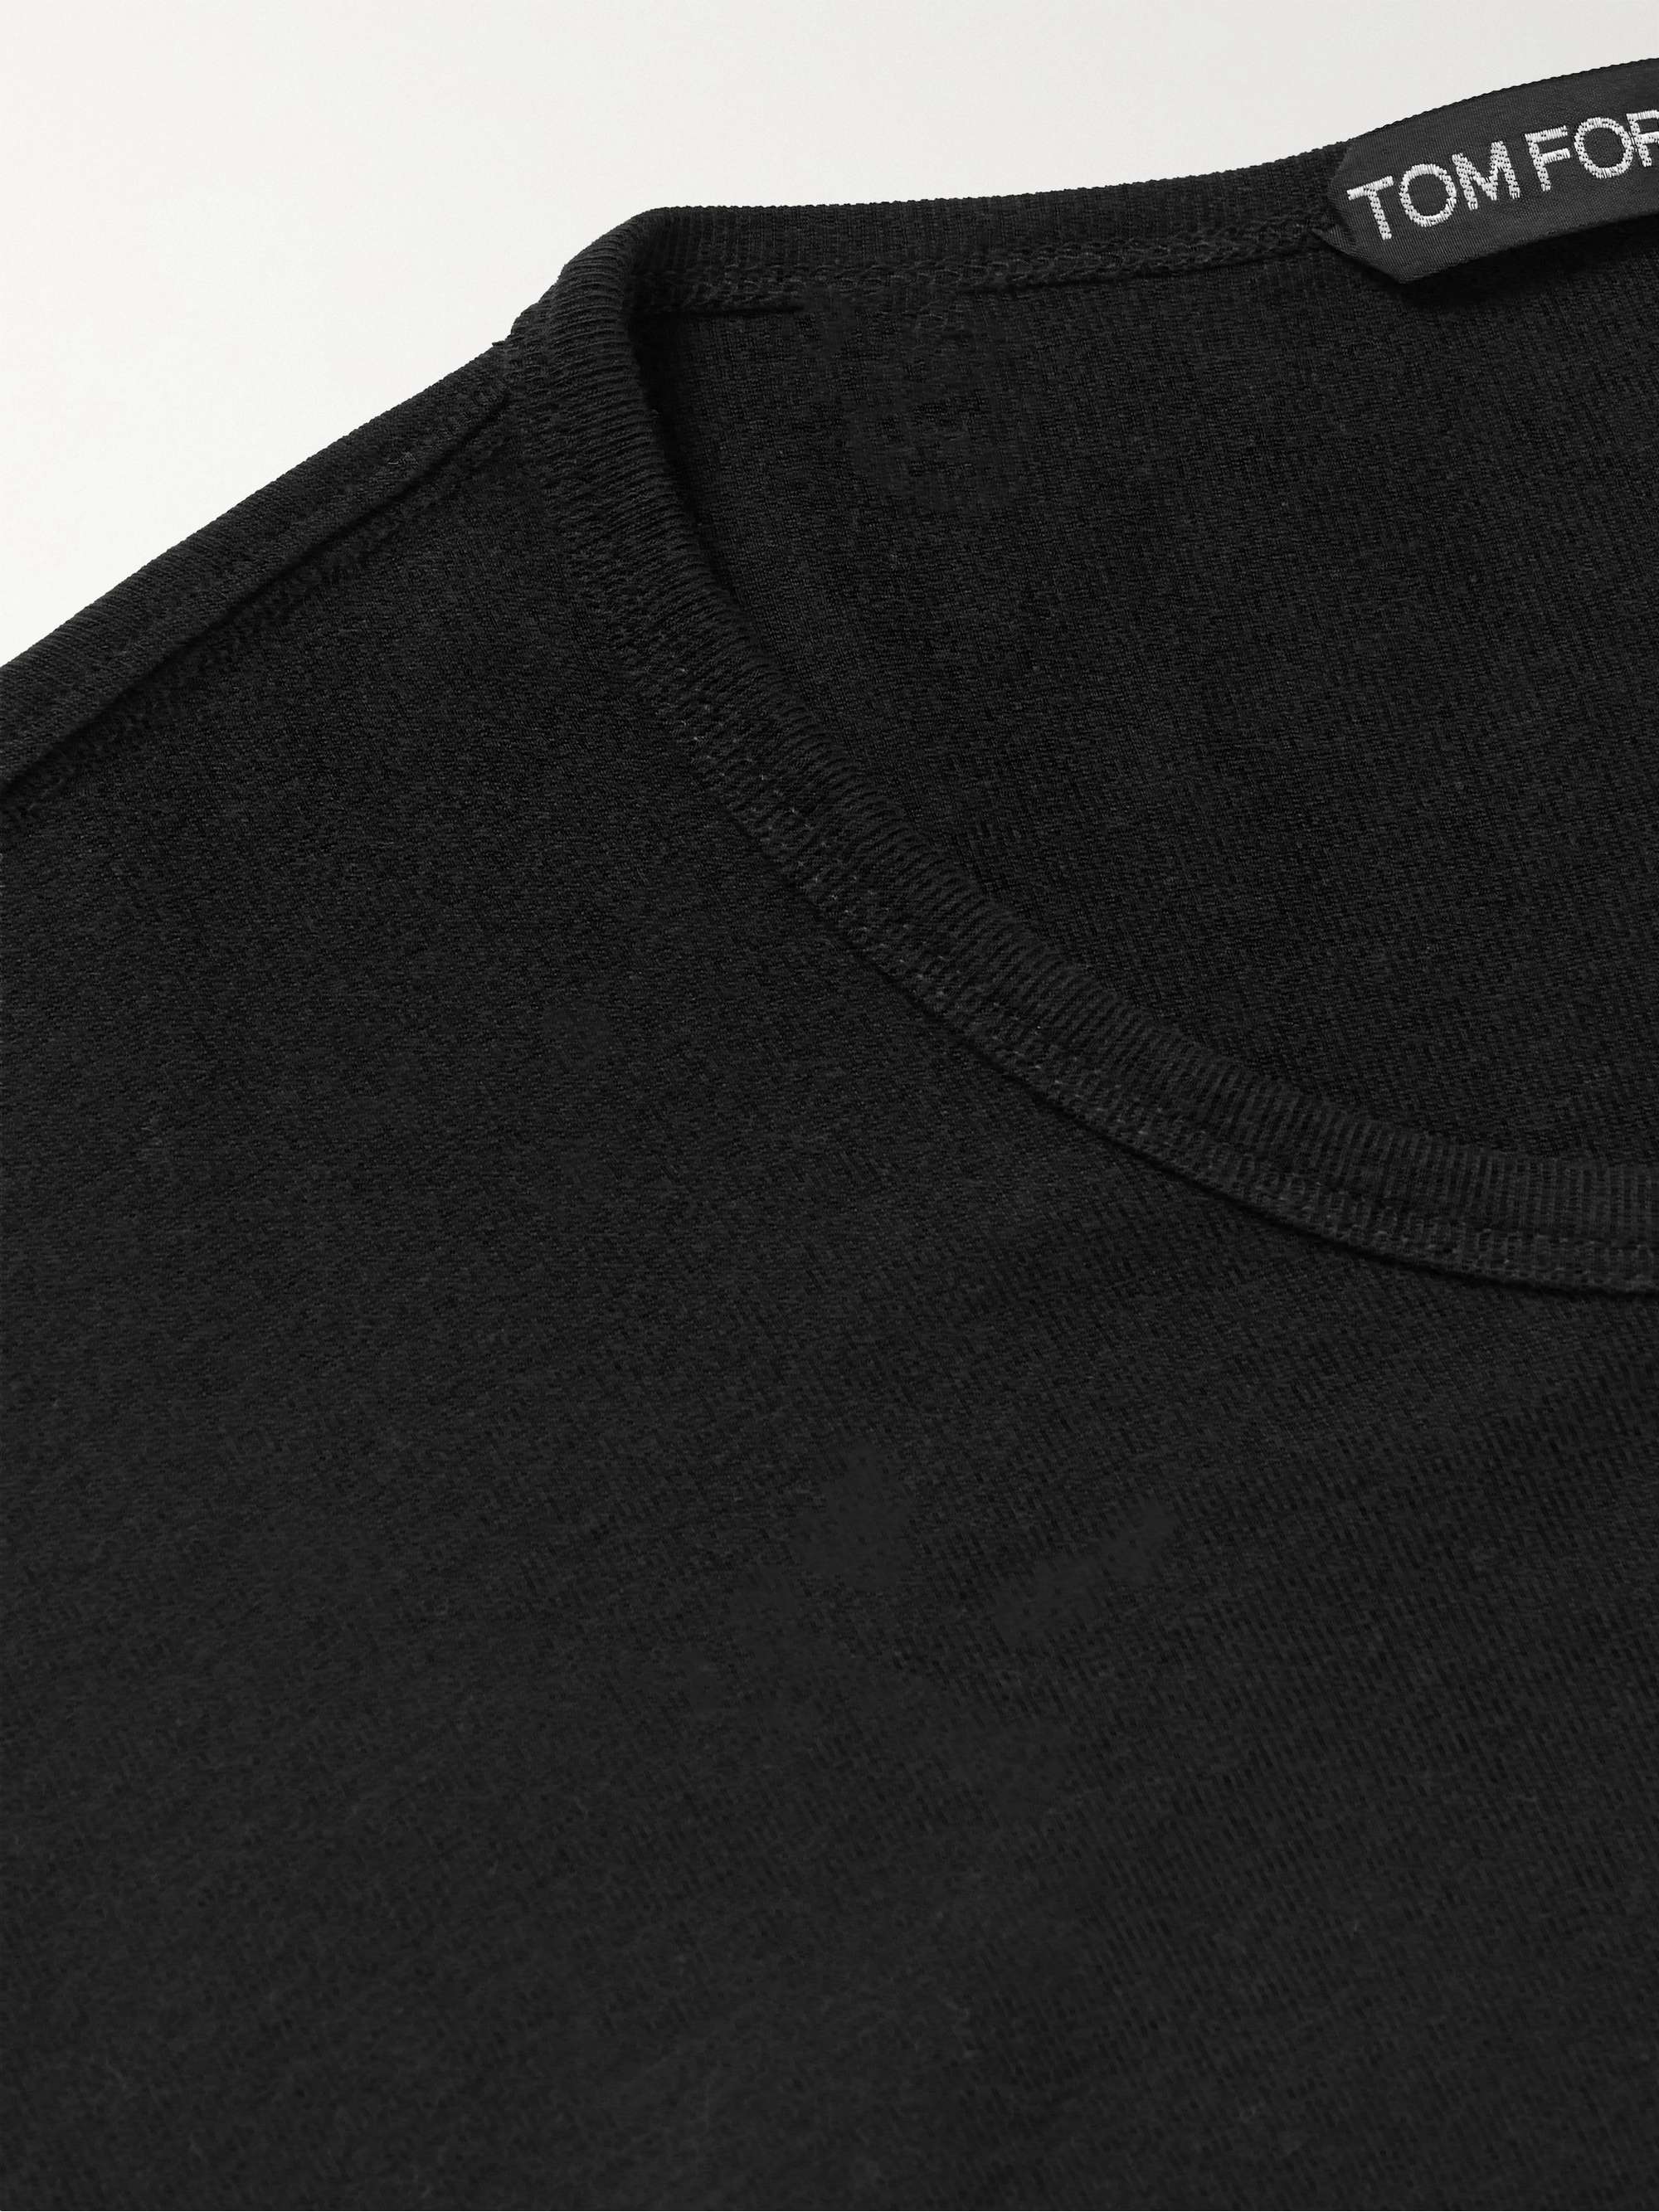 TOM FORD Modal and Cotton-Blend Jersey Henley T-Shirt